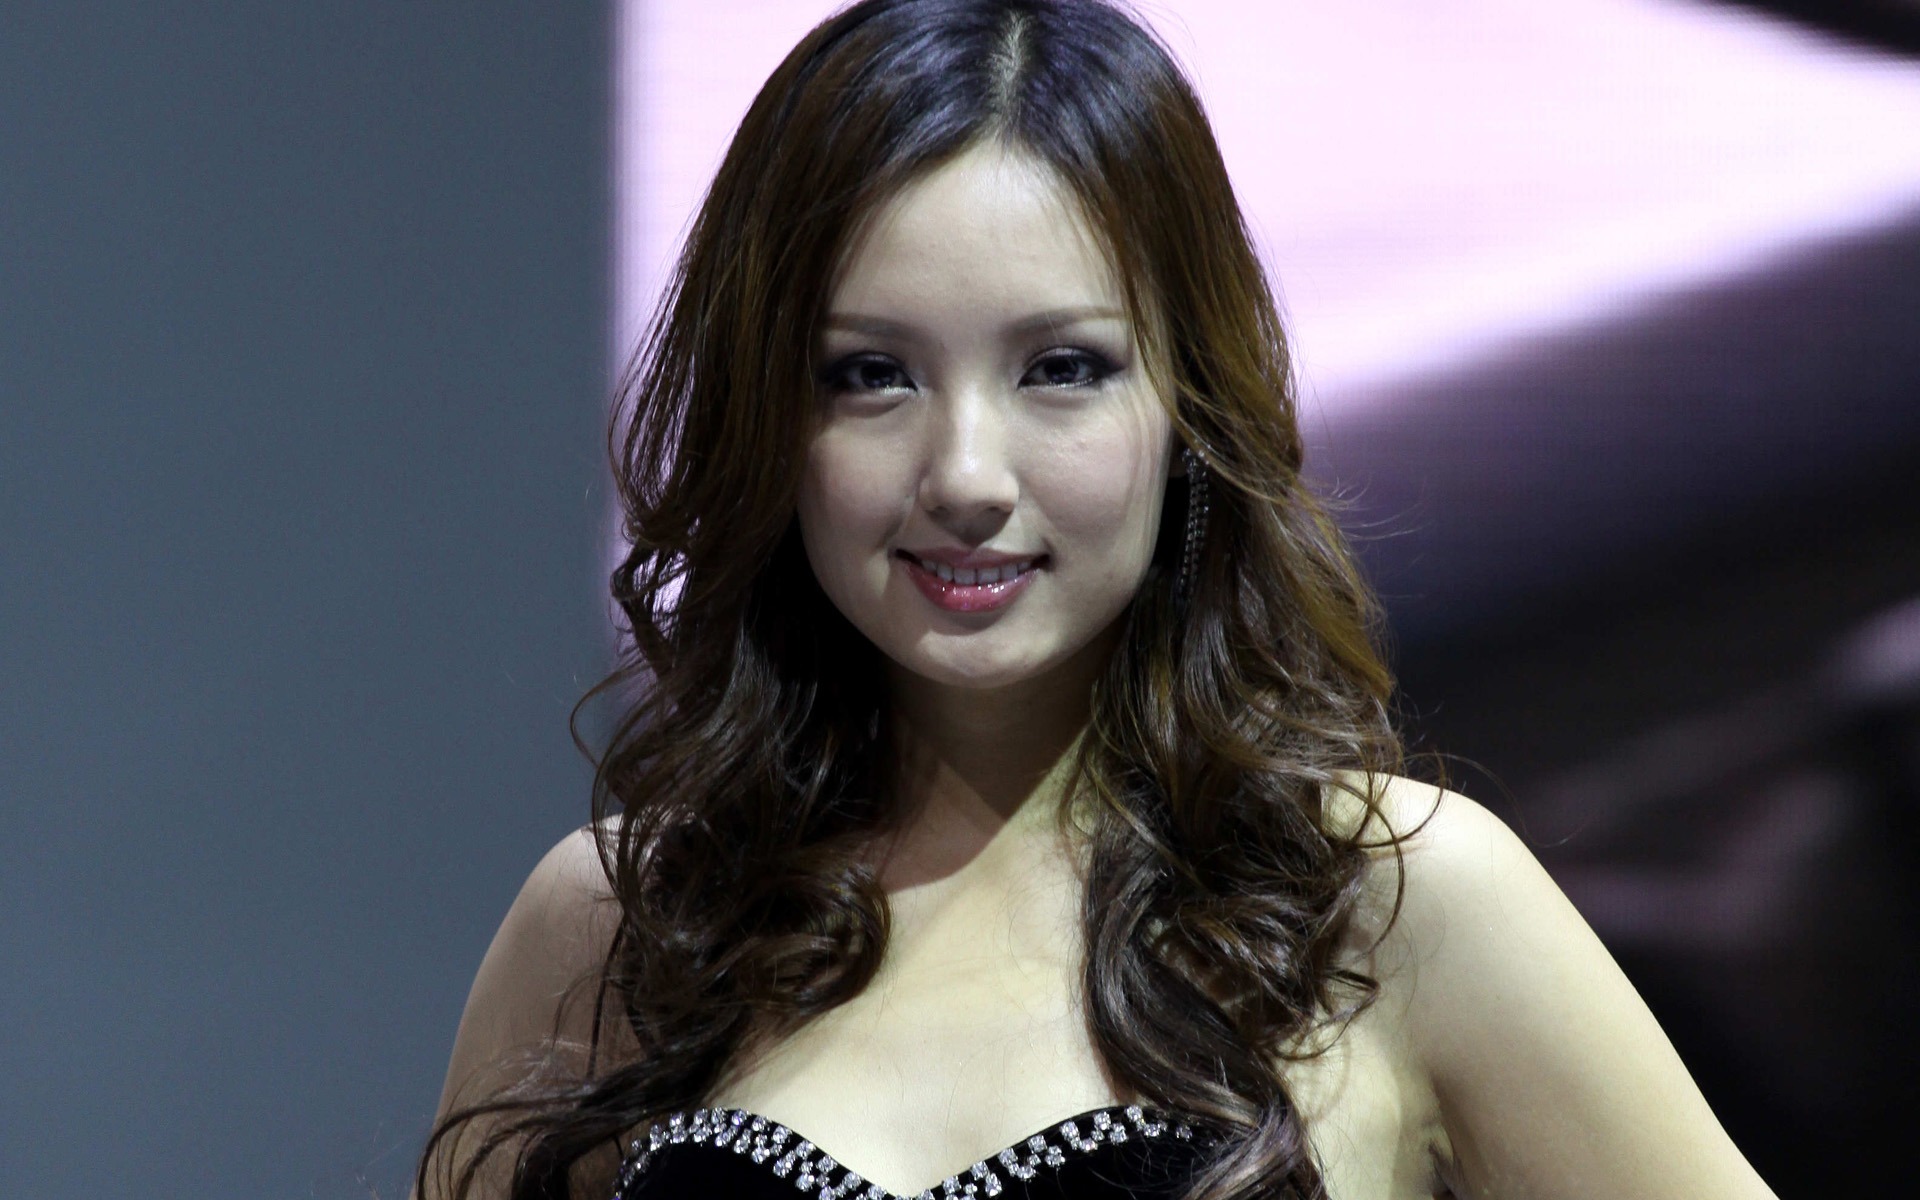 2010 Beijing Auto Show car models Collection (2) #5 - 1920x1200